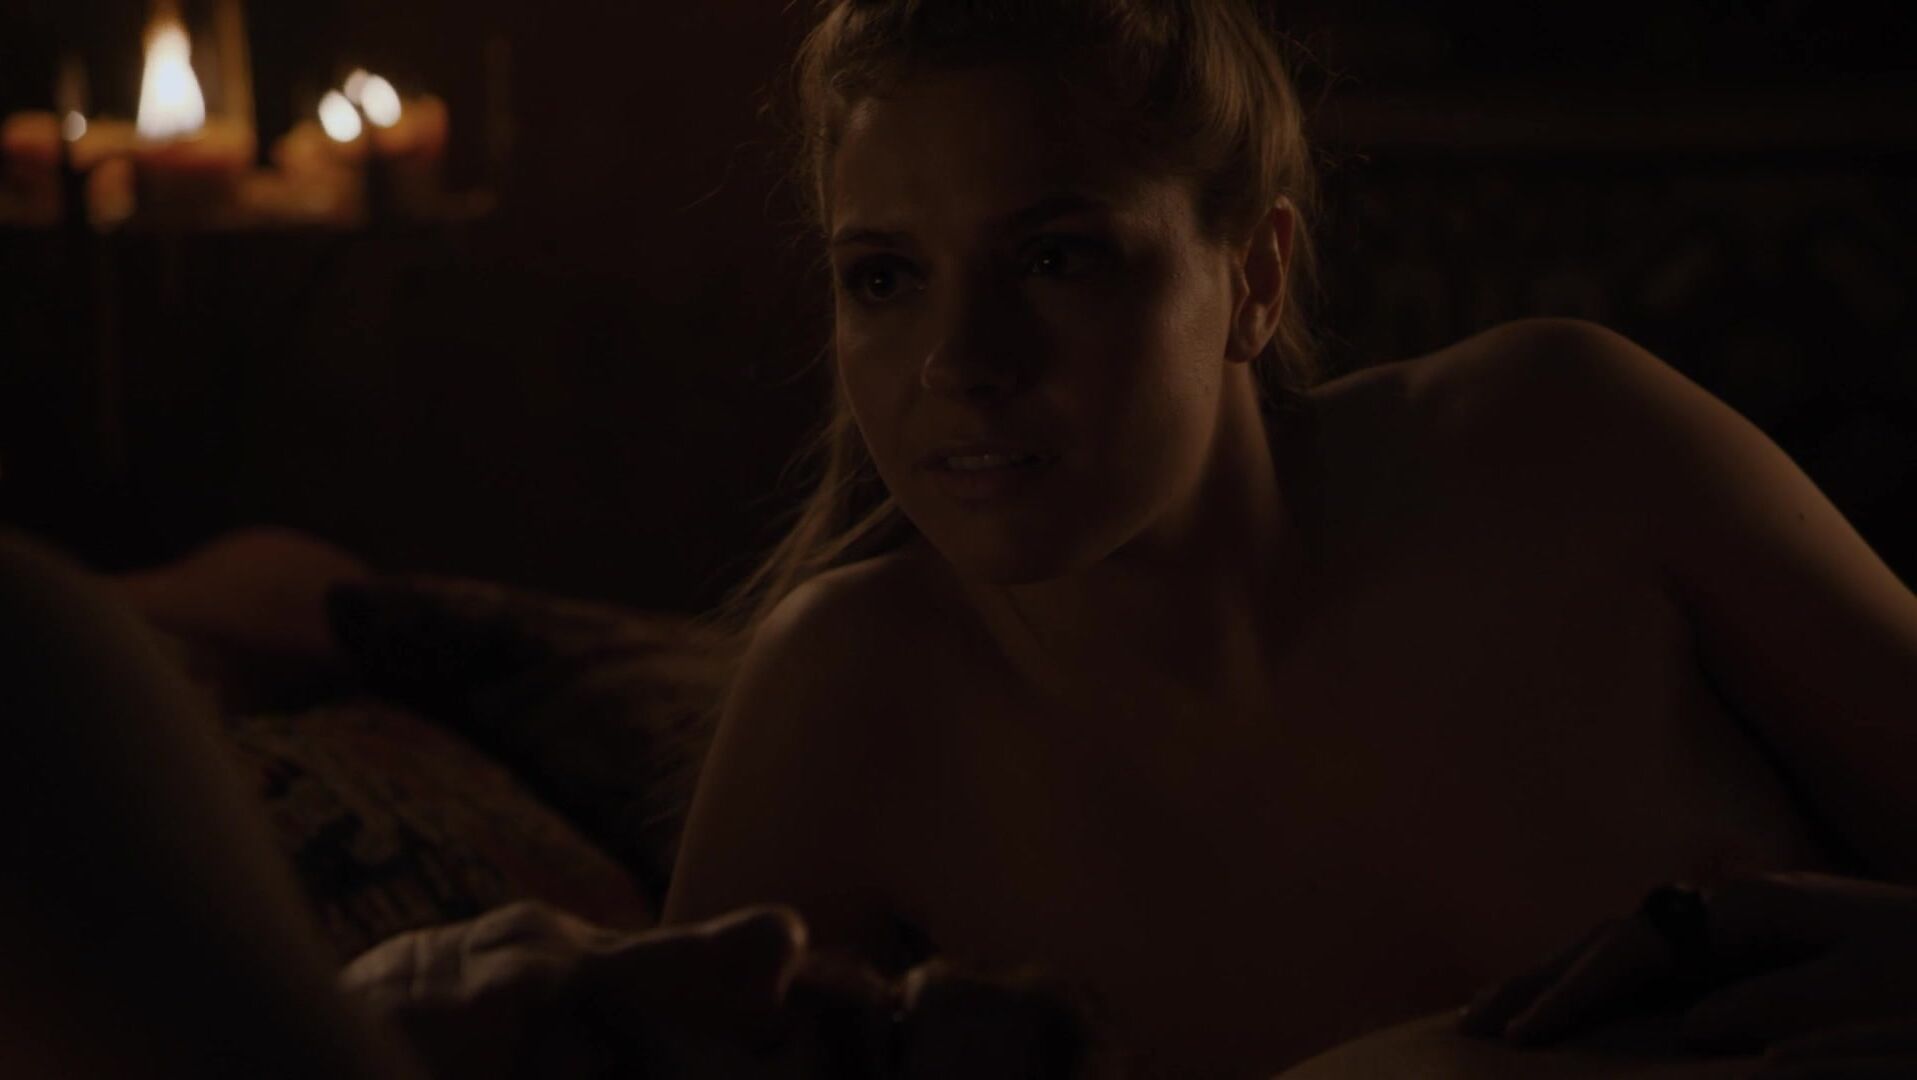 Teenage Girl Porn Marina Lawrence-Mahrra goes nude in Game of Thrones s08e01 (2019) Hard Core Free Porn